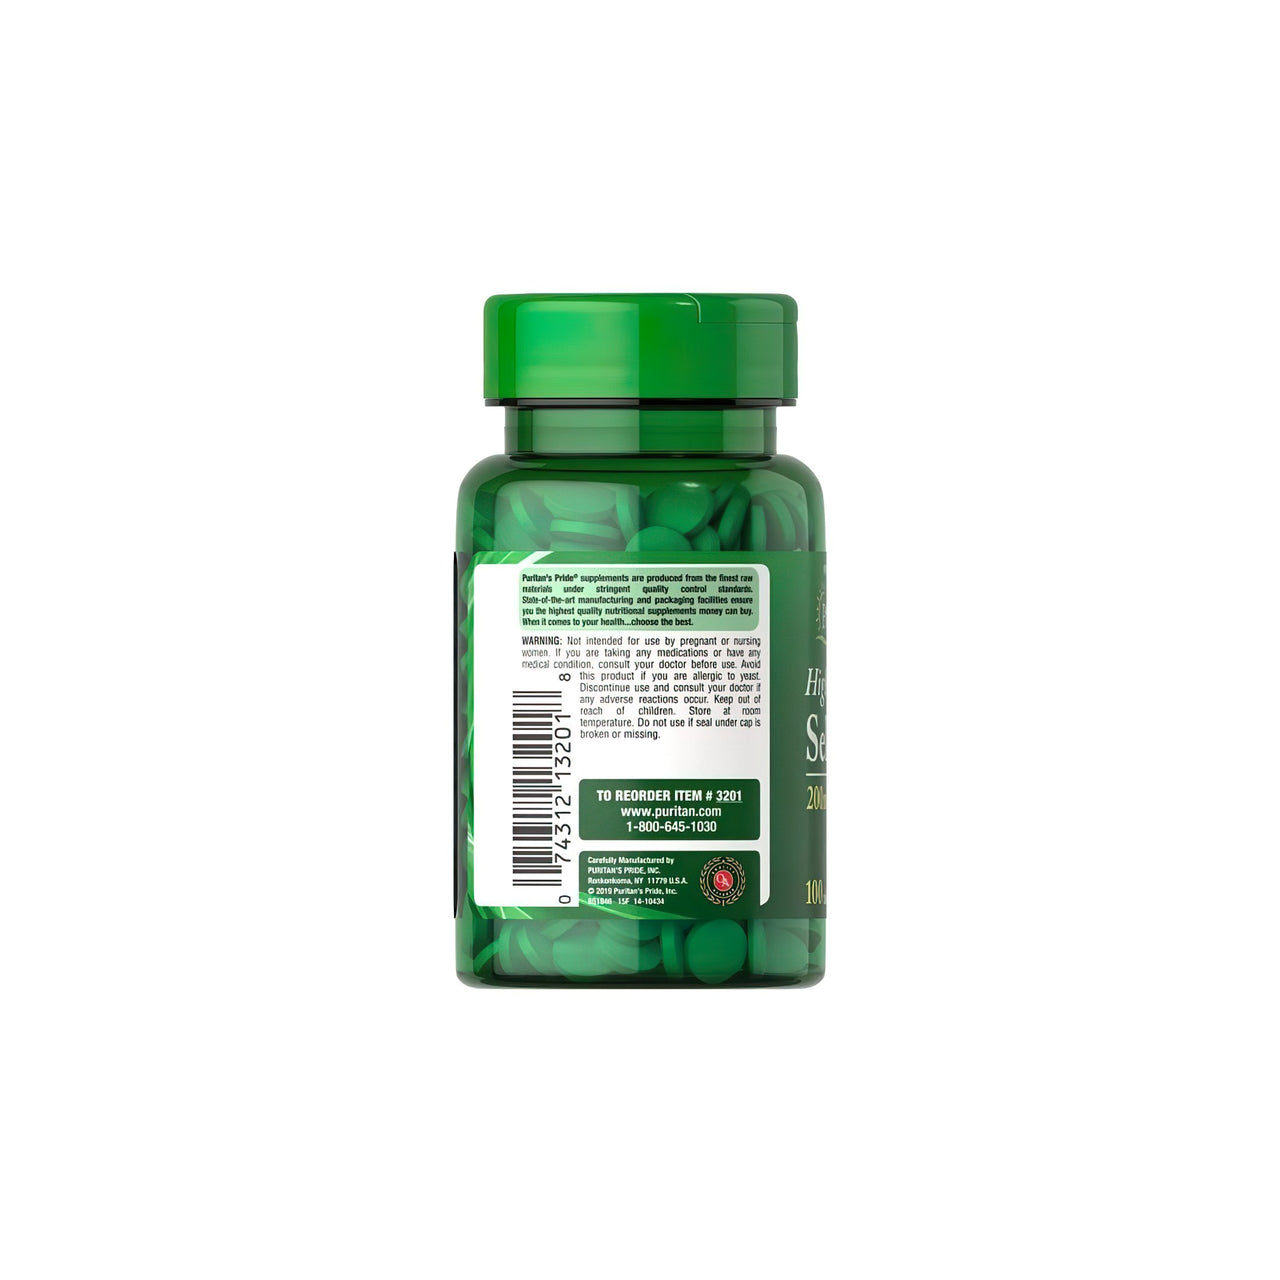 A bottle of Puritan's Pride Selenium 200 mcg 100 tablets, a dietary supplement containing green tea, an antioxidant, on a white background.